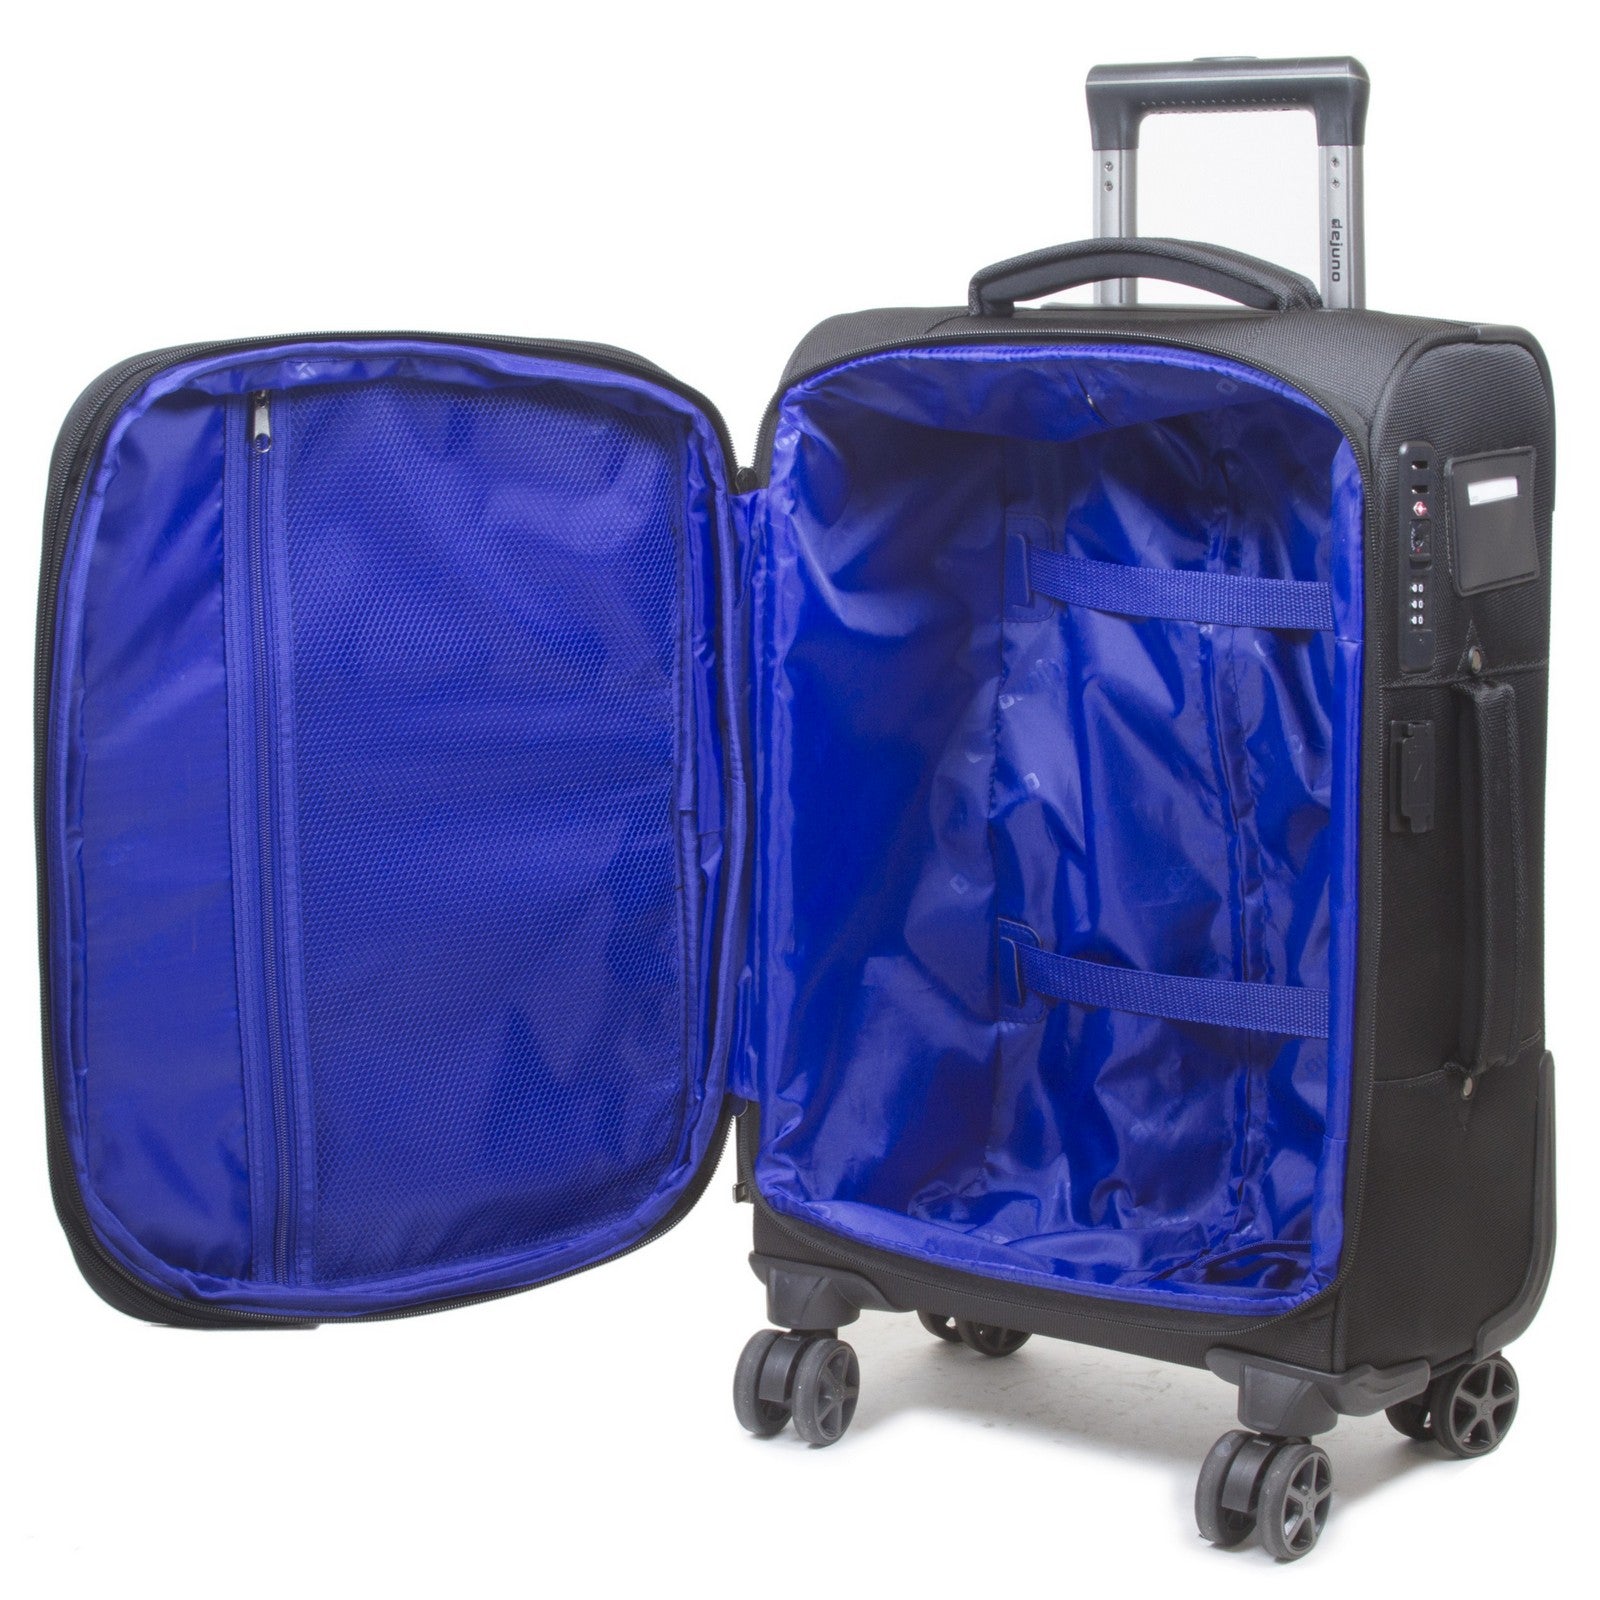 Dejuno Executive 3-Piece Spinner Luggage Set With USB Port